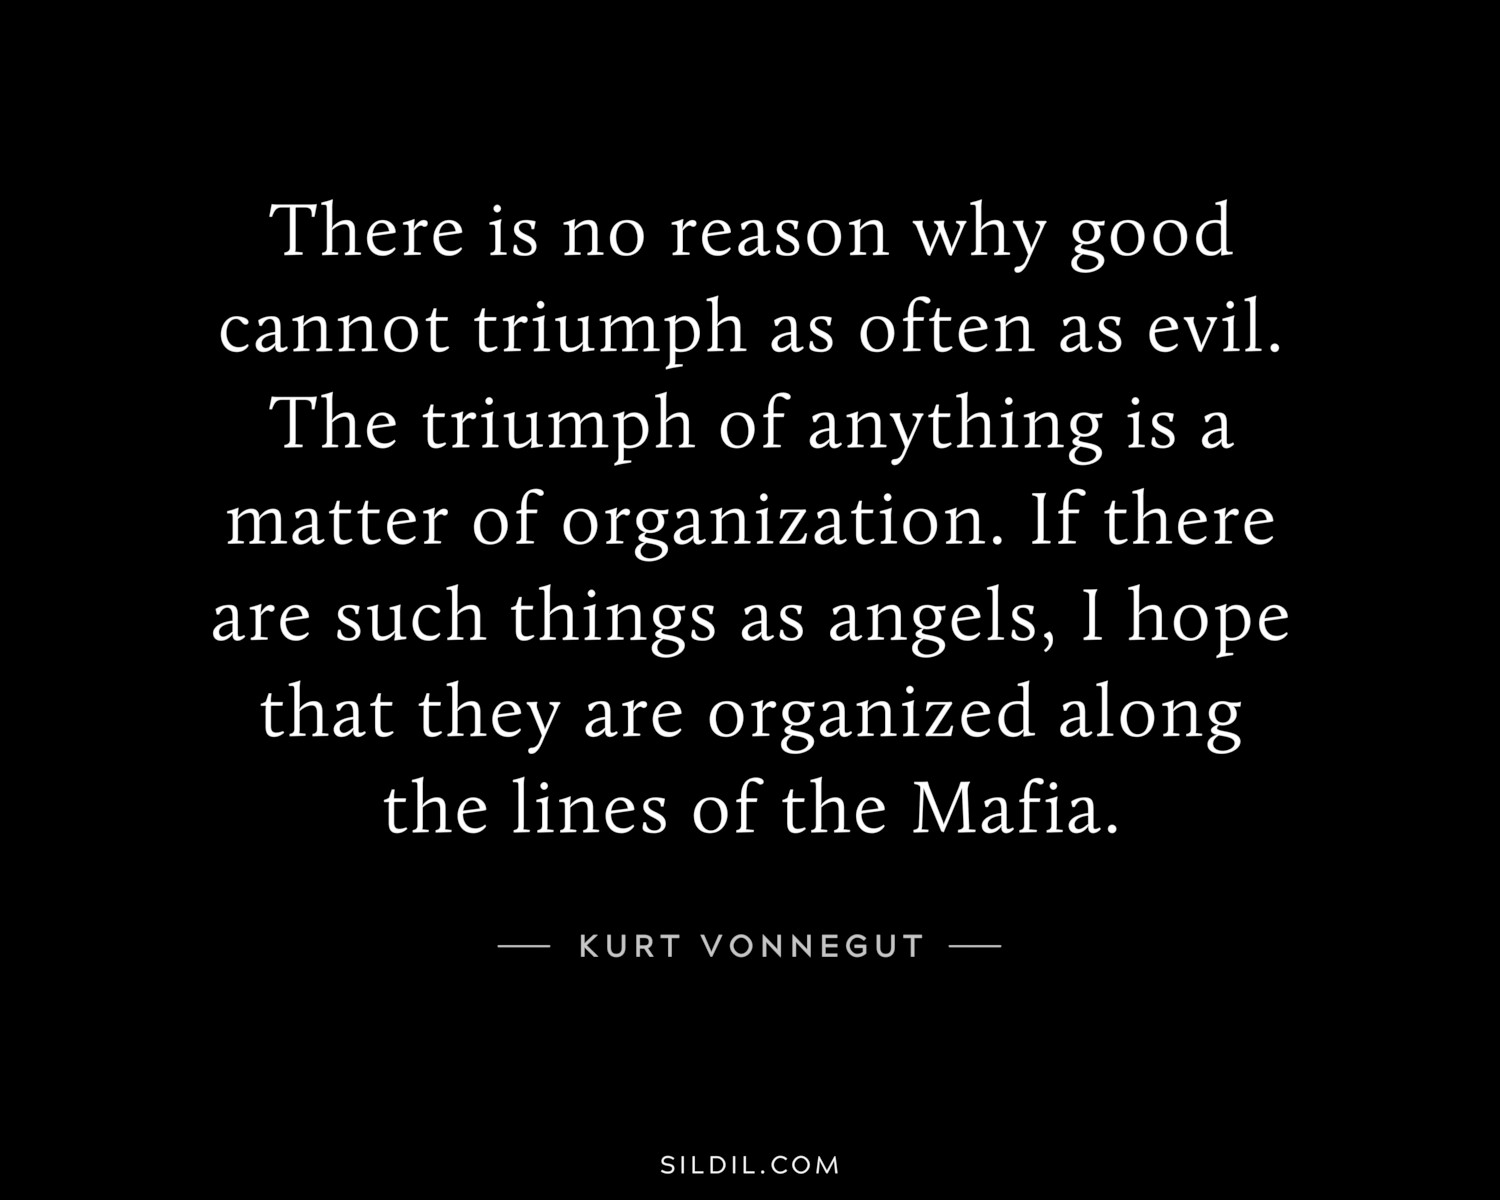 There is no reason why good cannot triumph as often as evil. The triumph of anything is a matter of organization. If there are such things as angels, I hope that they are organized along the lines of the Mafia.